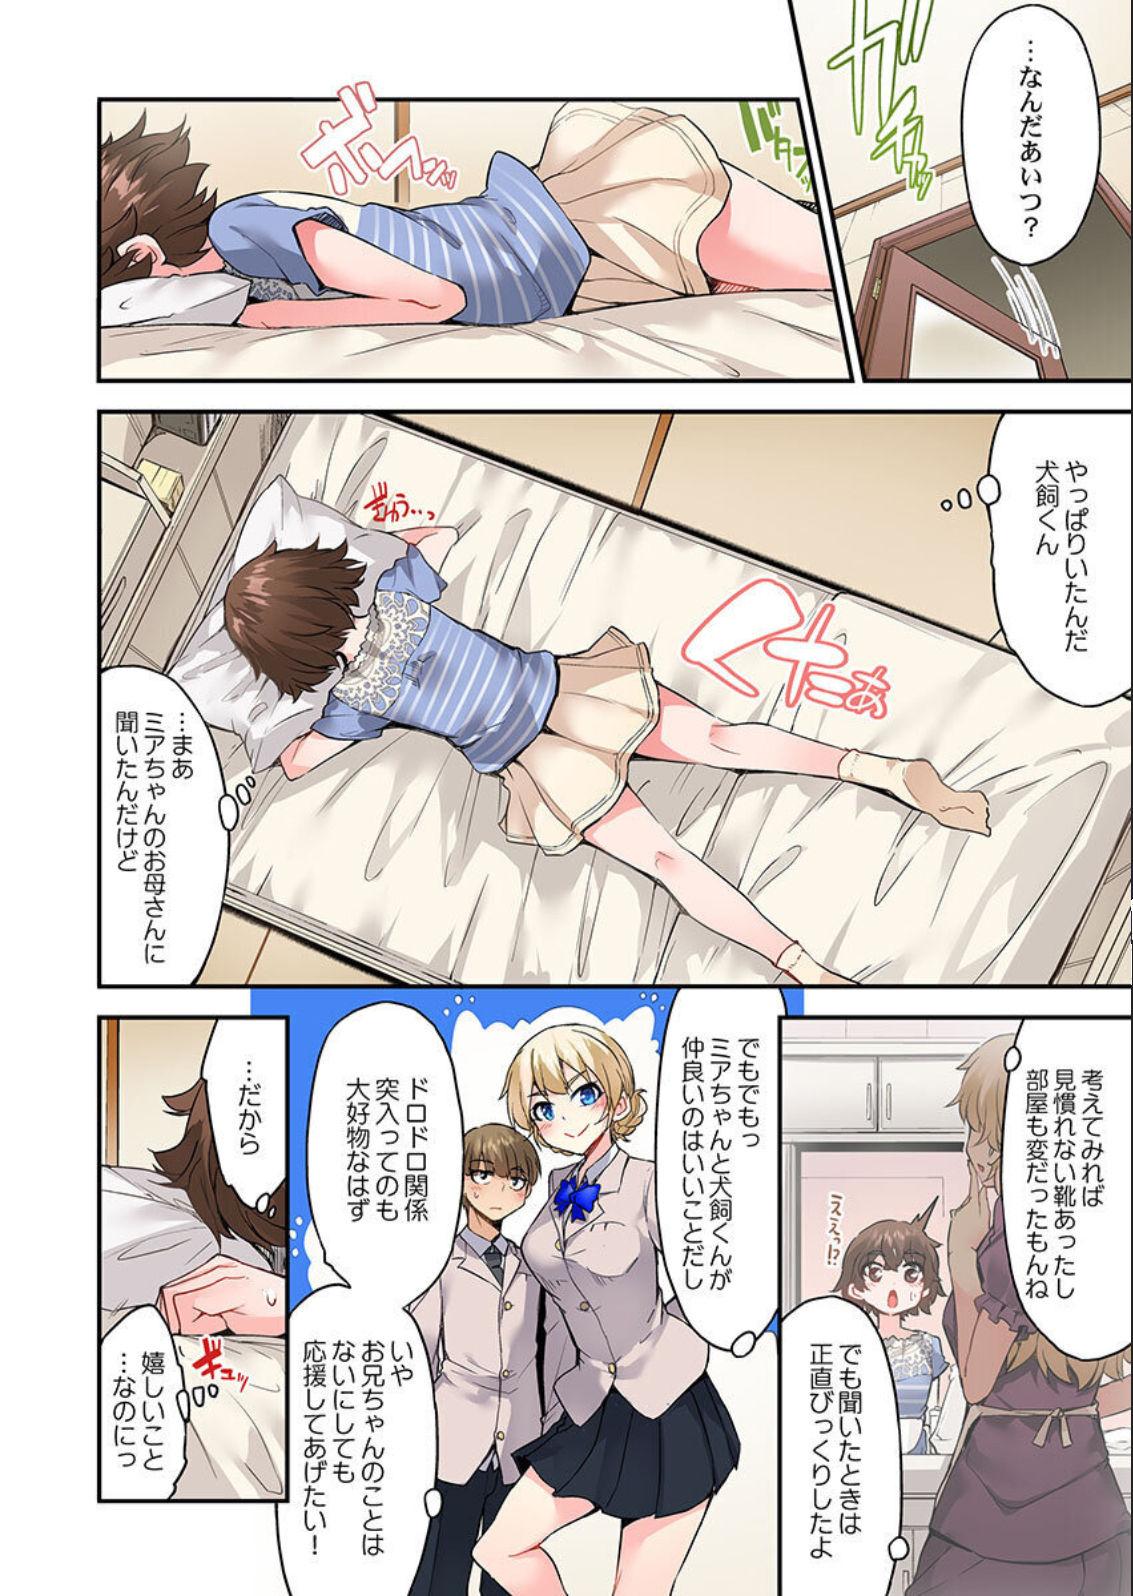 Traditional Job Of Washing Girls' Body Ch. 45-51 and brand new CH. 57 38